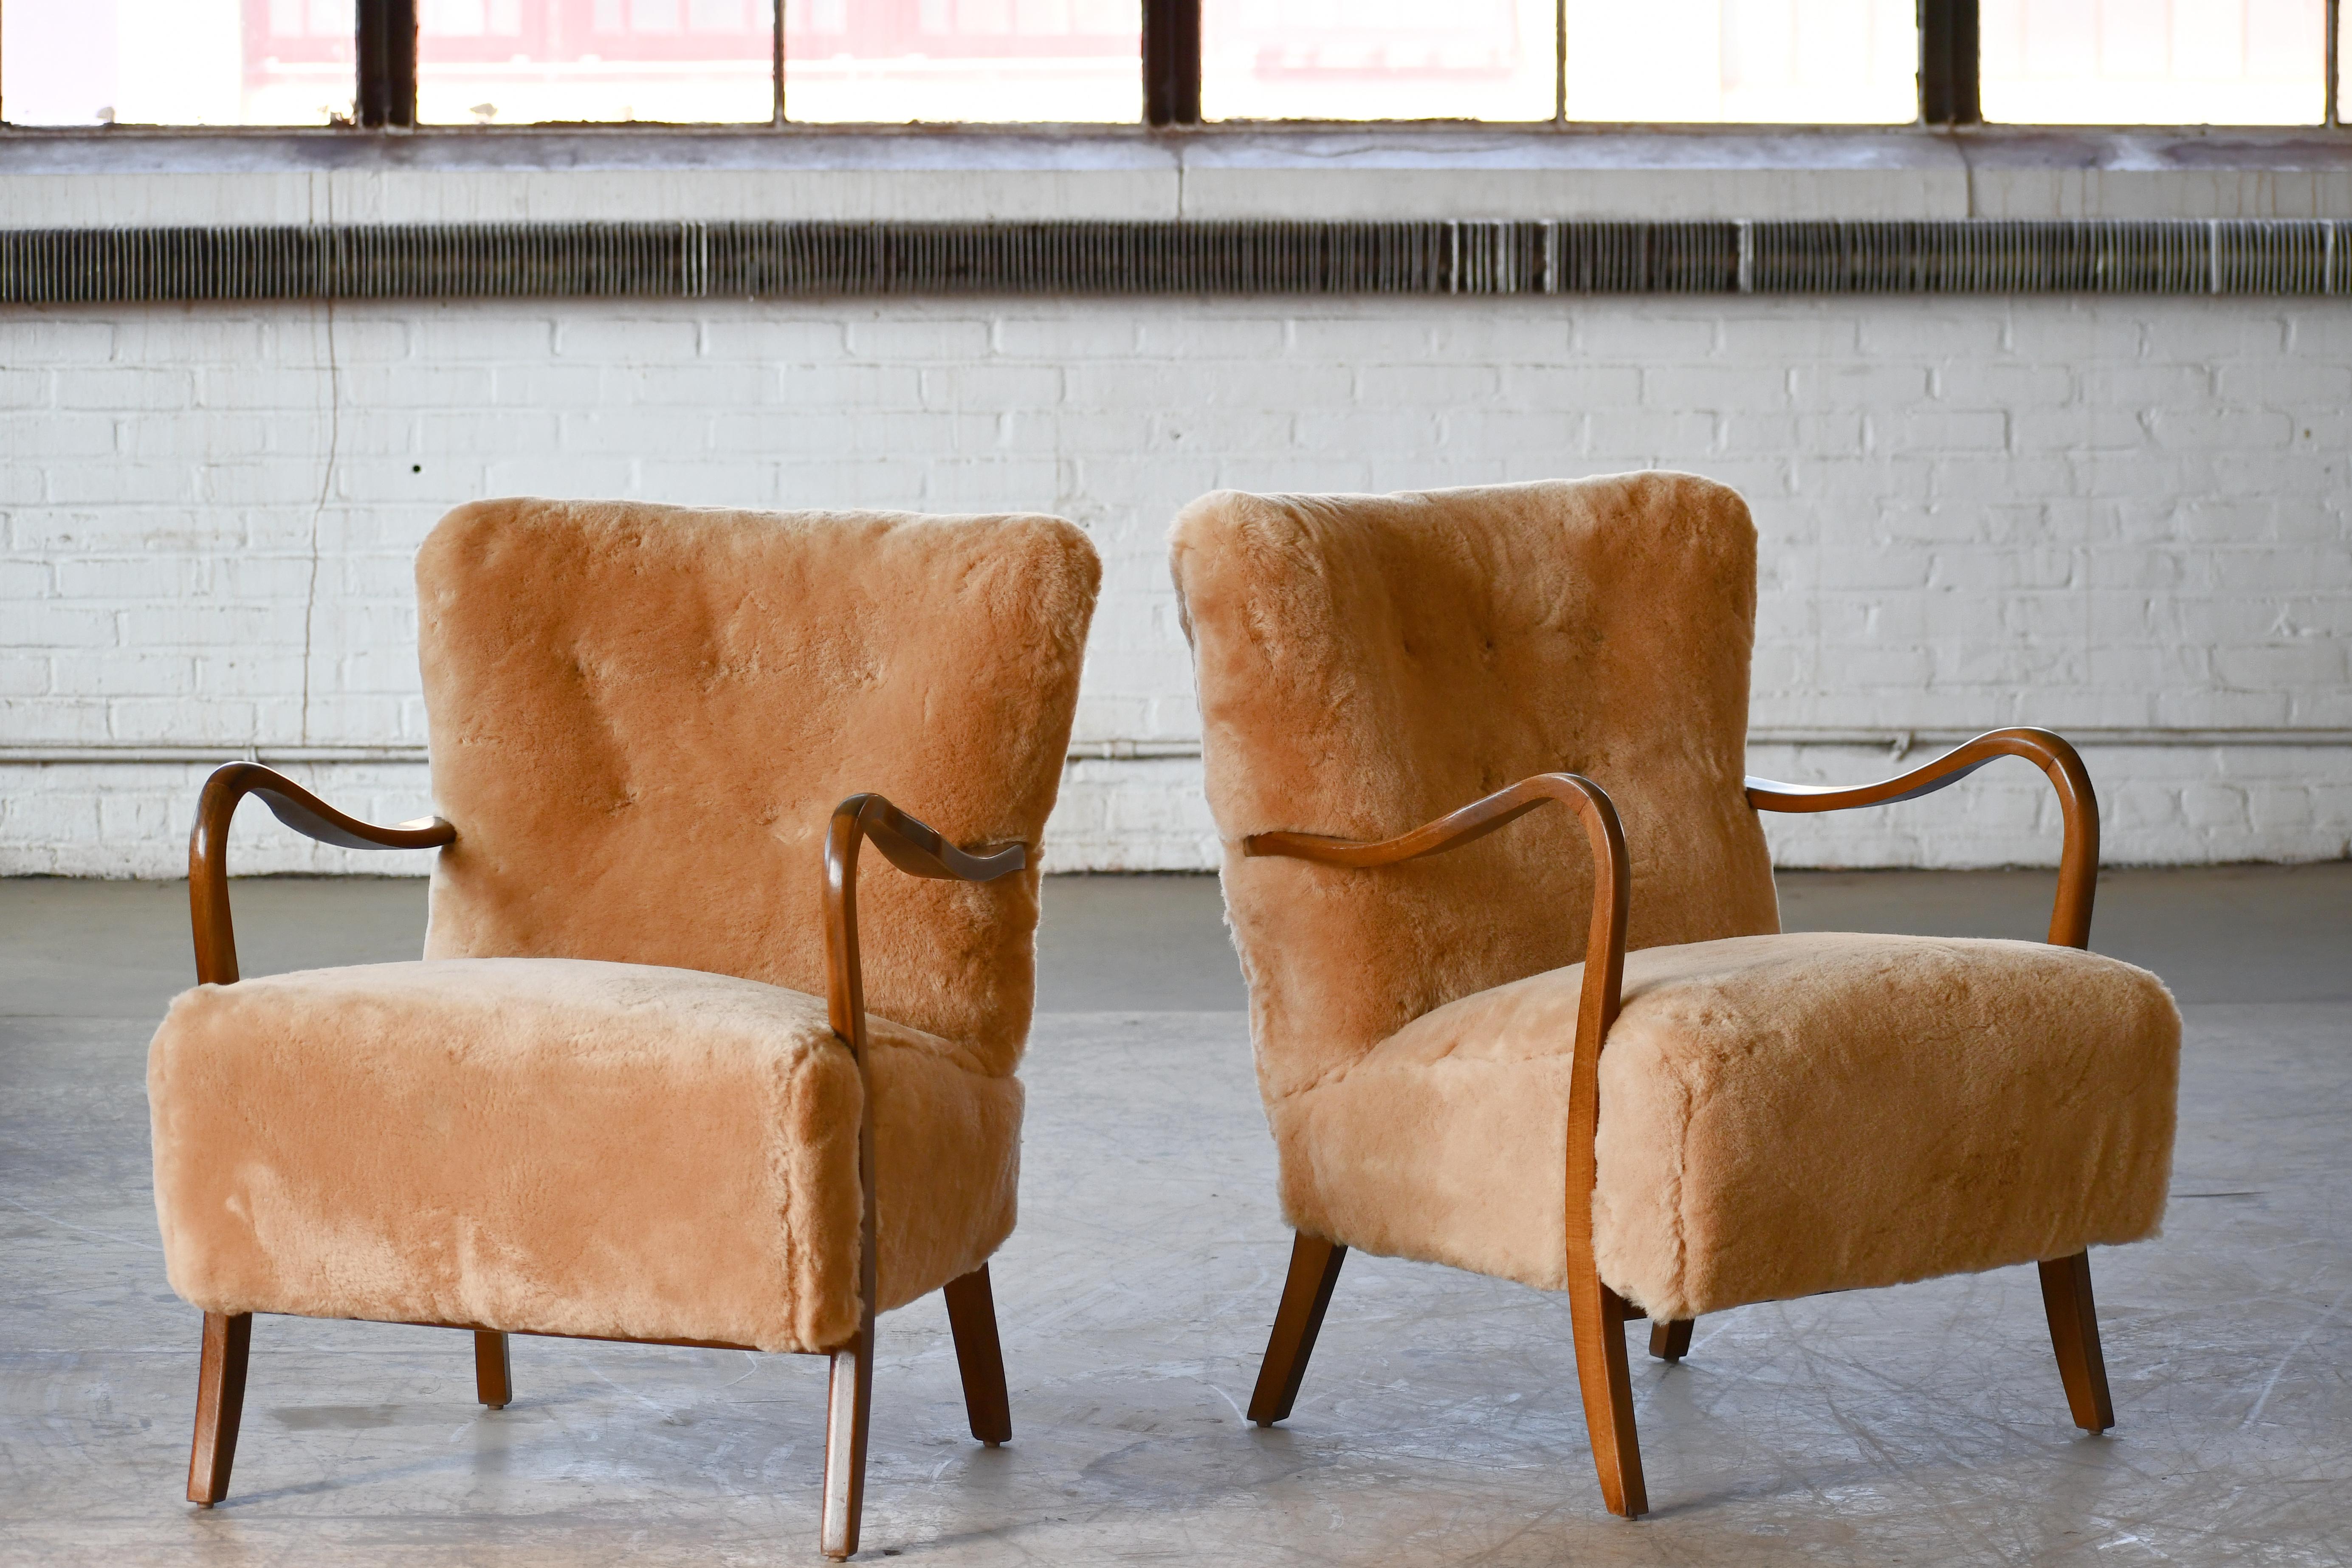 Classic pair of elegant Danish low back armchairs from the 1940s by Alfred Christensen for Slagelse Mobelvaerk with open armrests in beautifully curved stained beech. We have reupholstered them in exuberant amber colored straight fleece sheepskin by